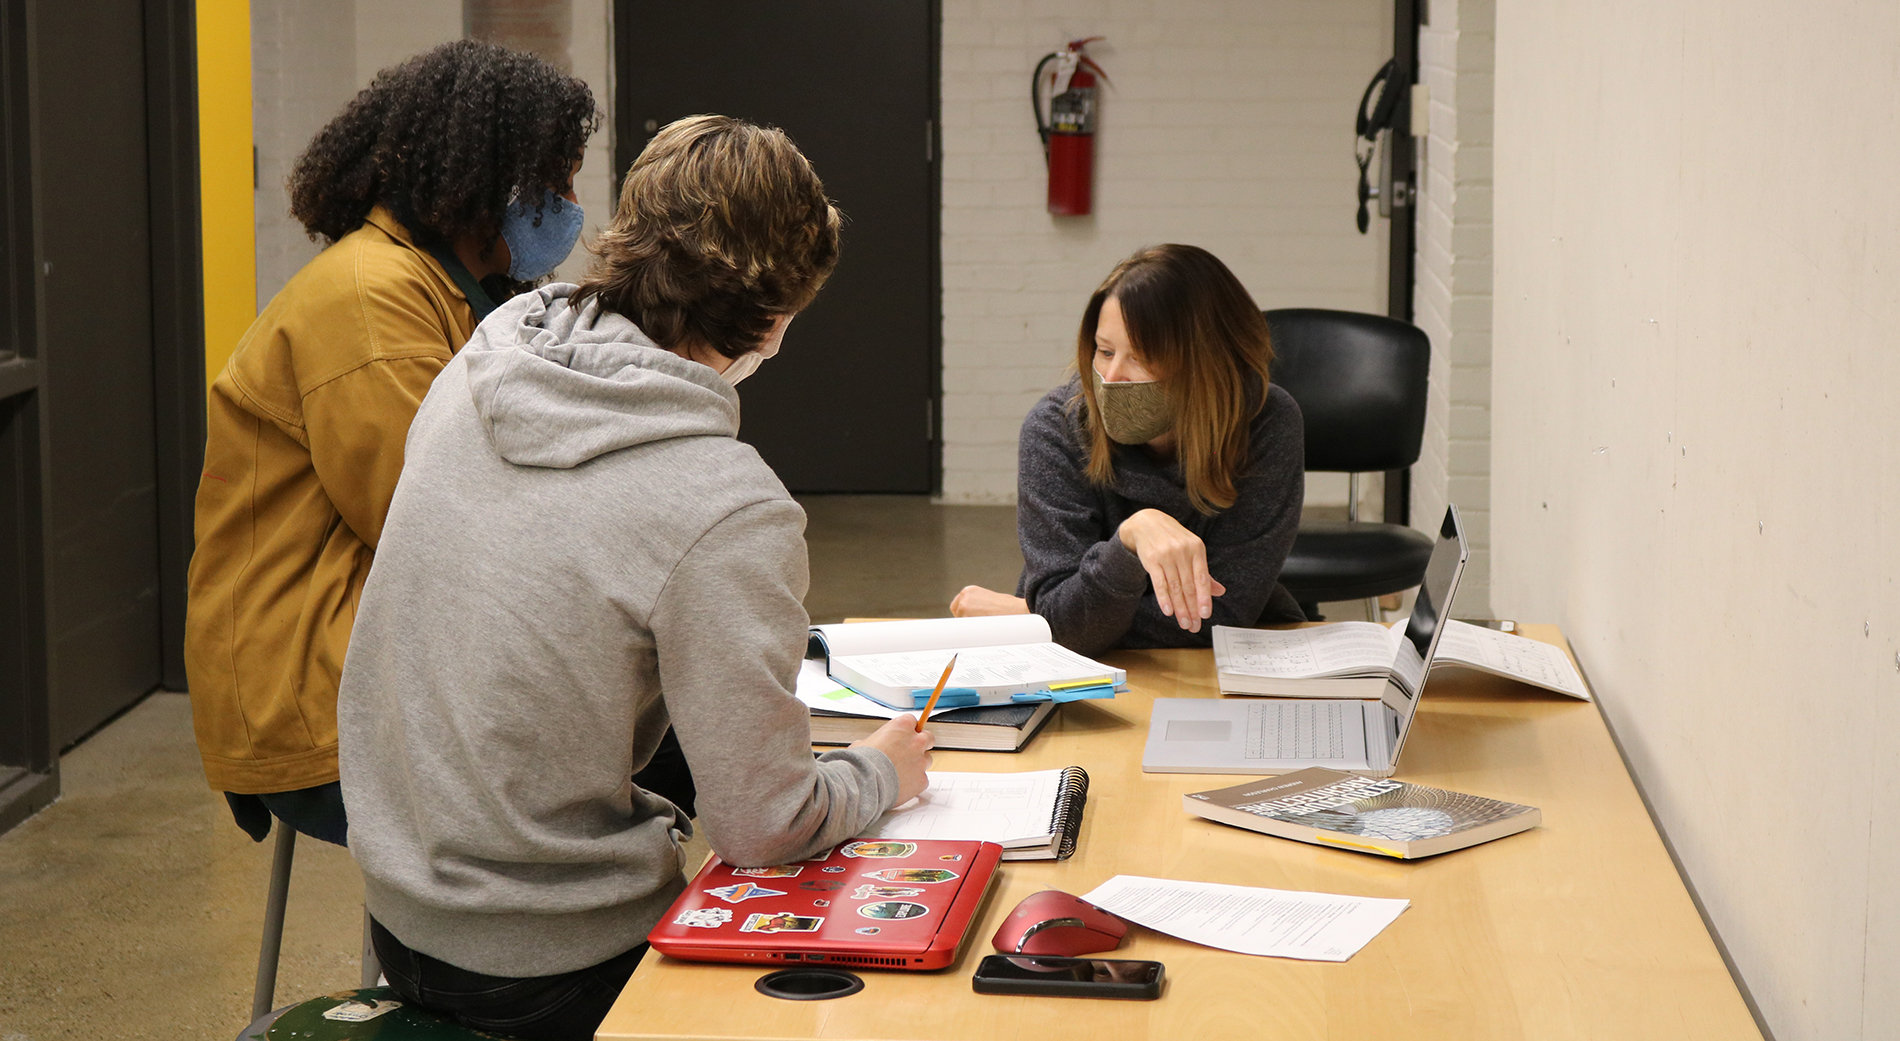 A faculty member helps students with coursework at one of the desks inside the Loranger Architecture building.